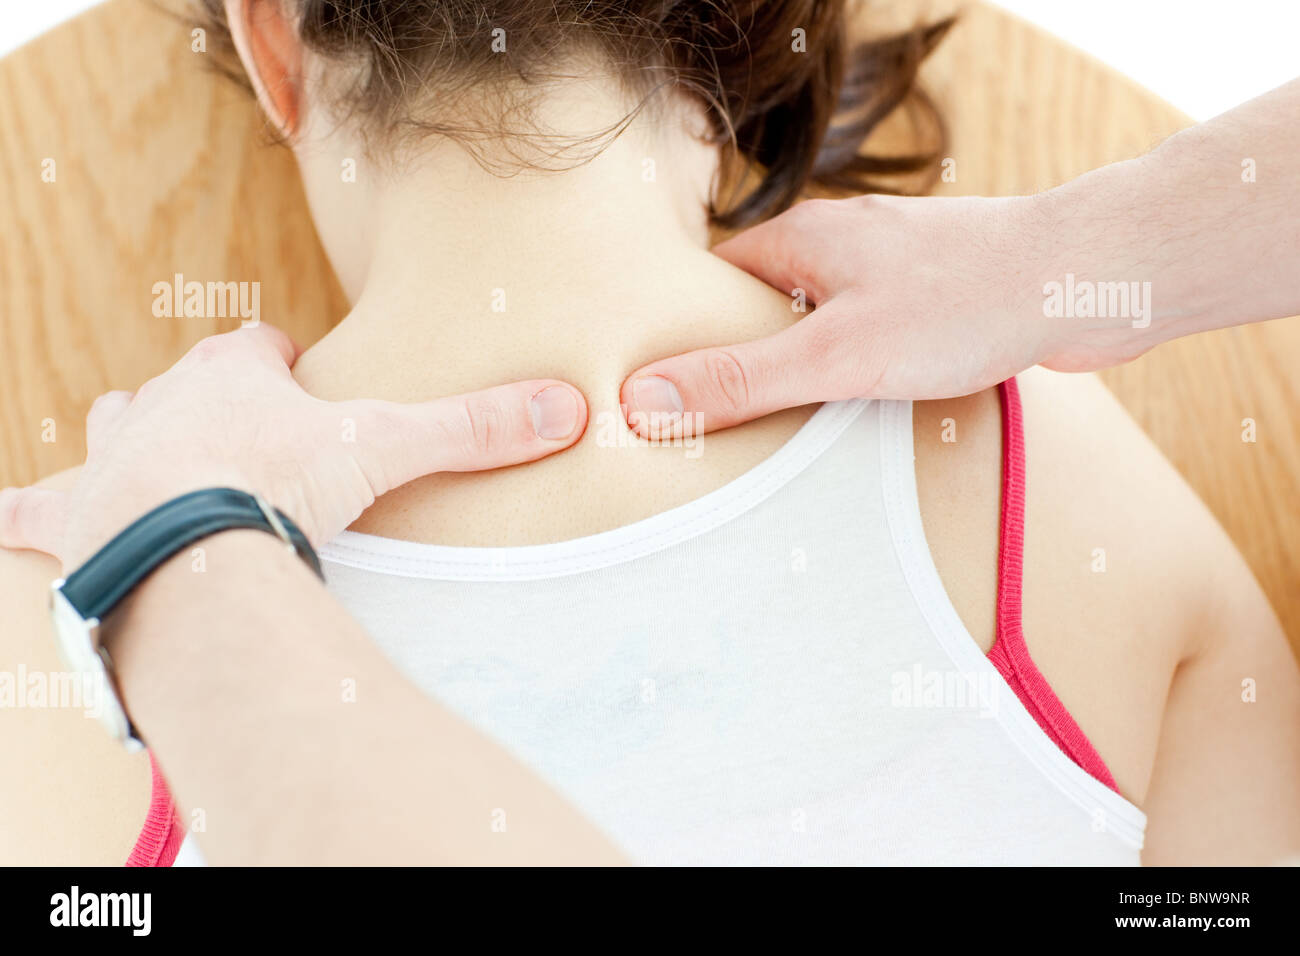 Close-up of a brunette woman receiving a back massage Stock Photo